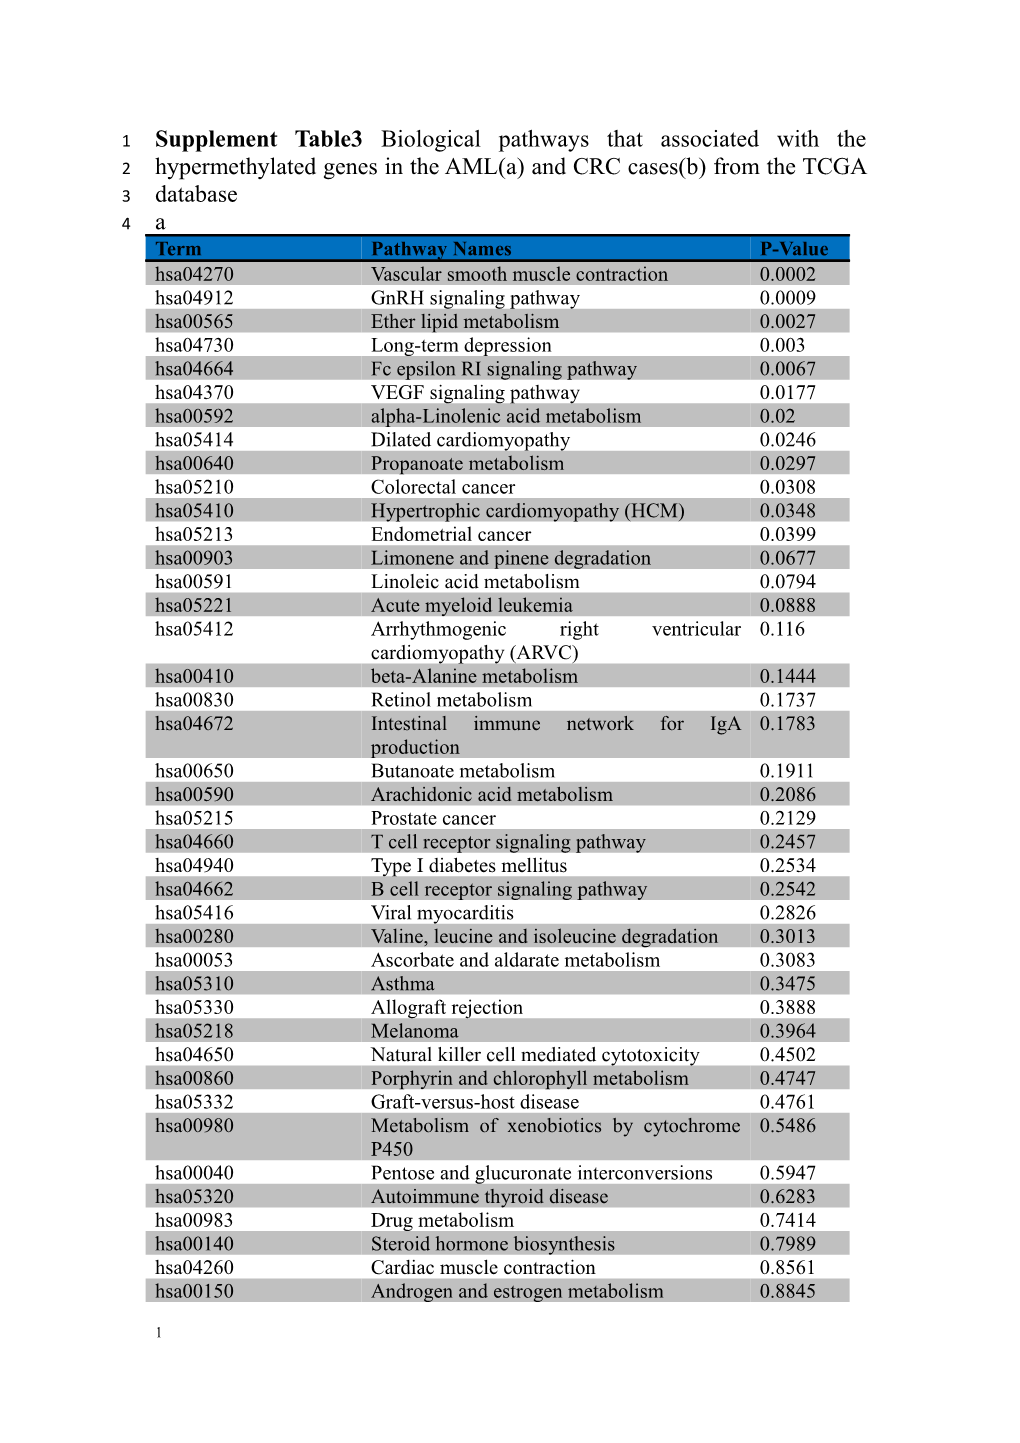 Supplement Table3 Biological Pathways That Associated with the Hypermethylated Genes In